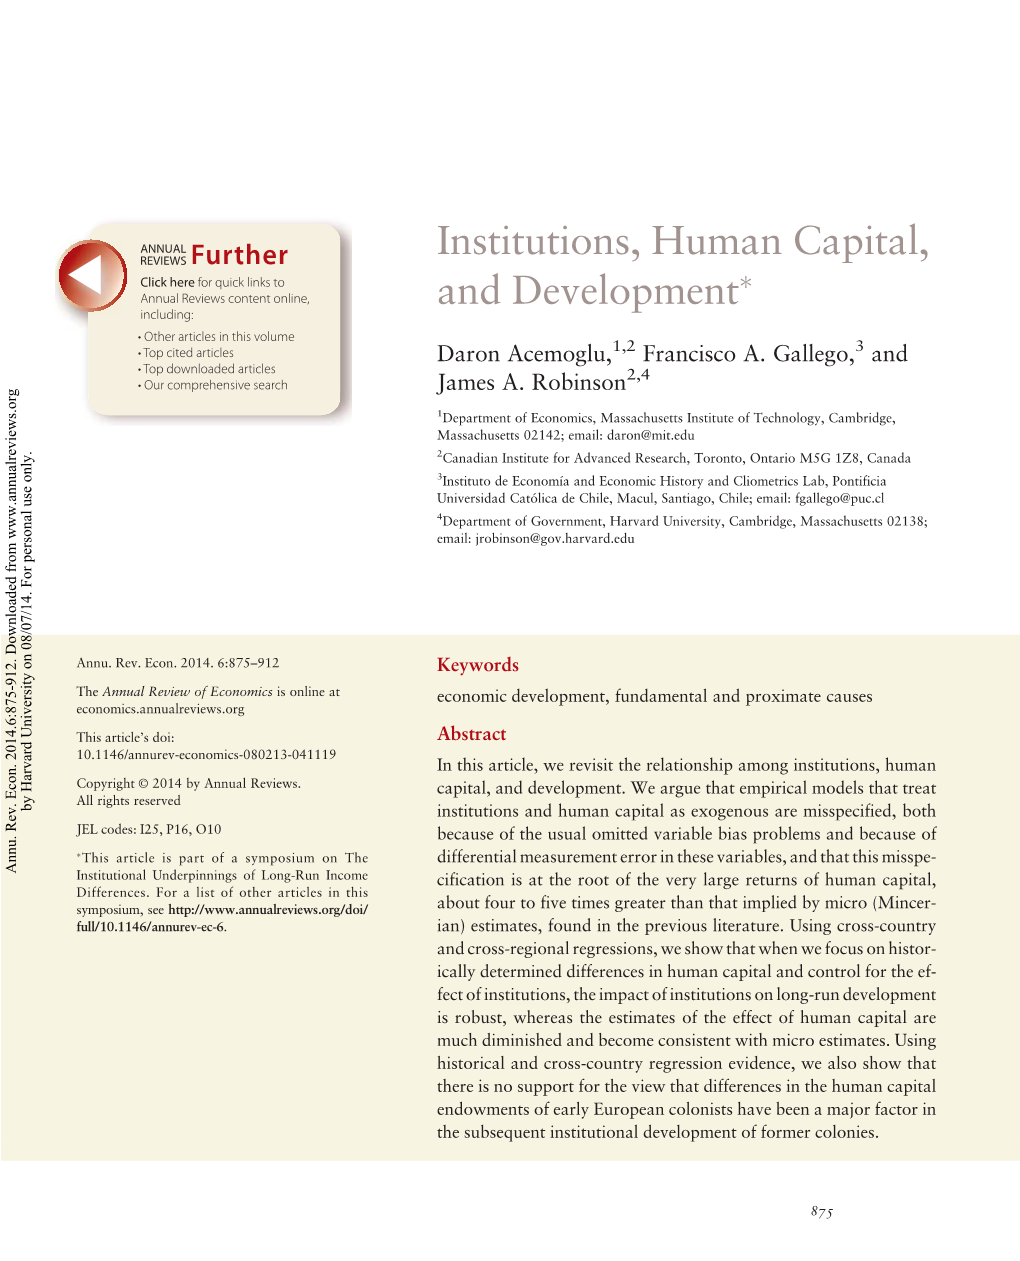 Institutions, Human Capital, and Development